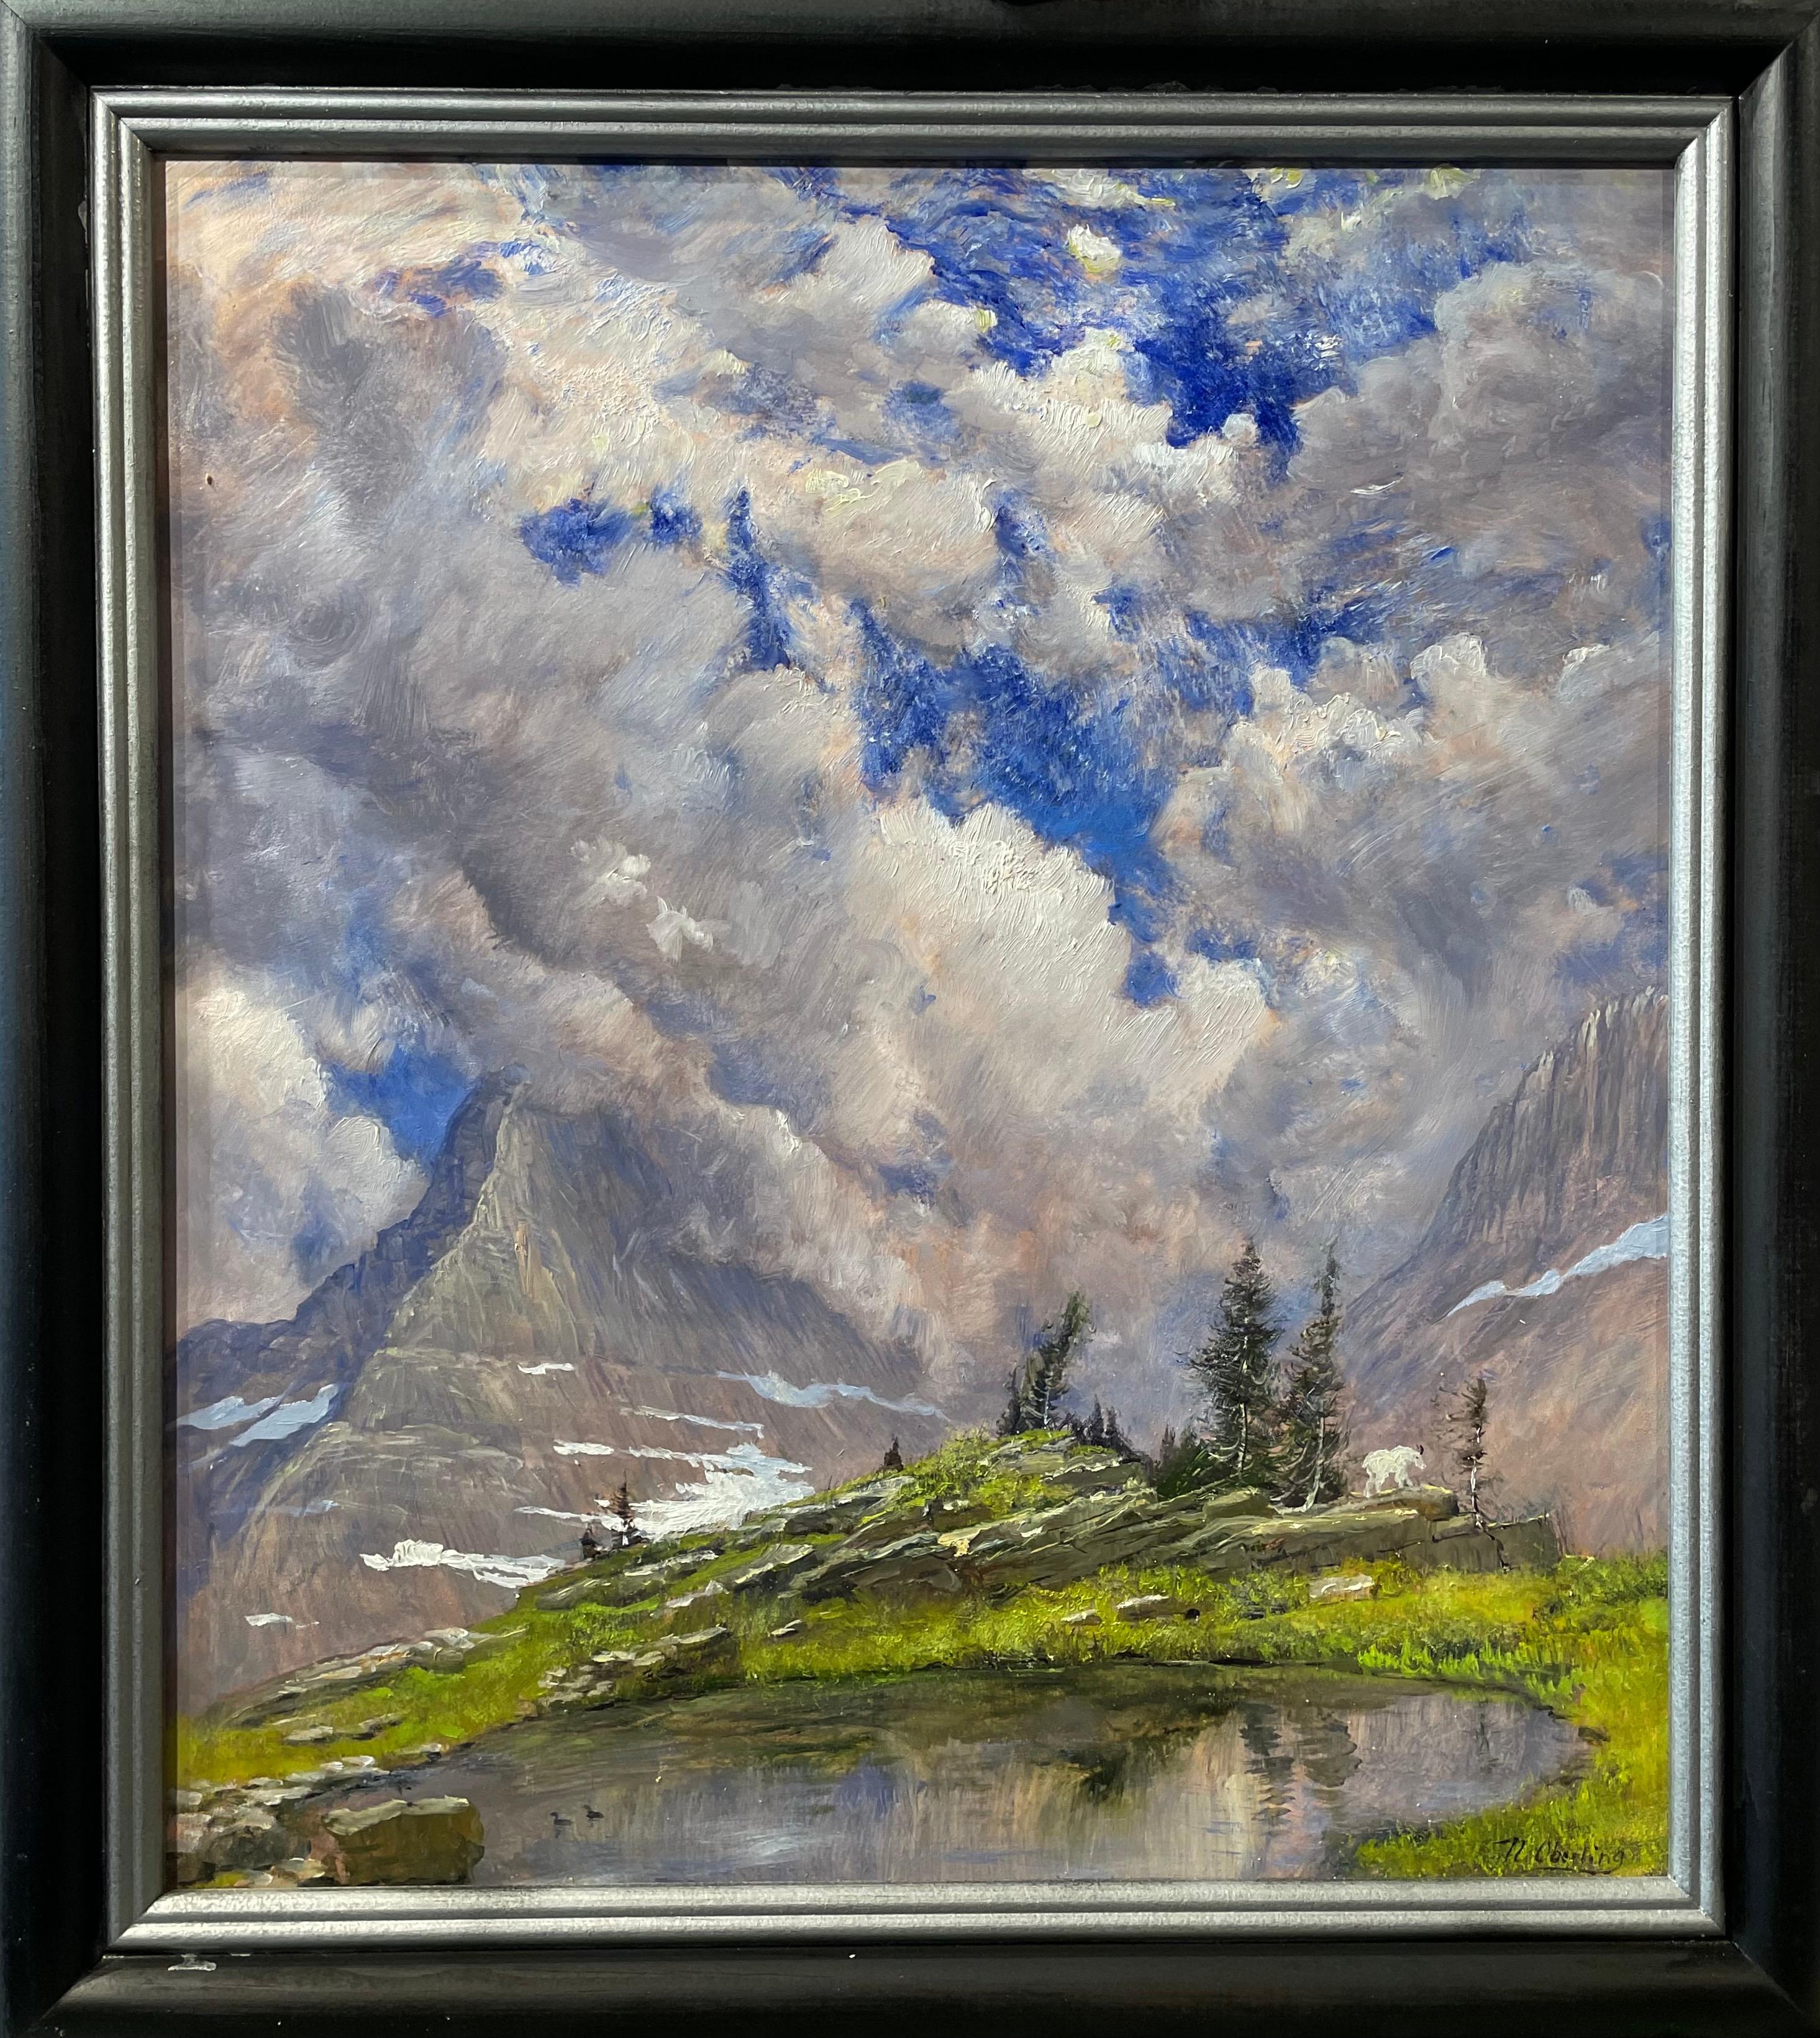 Nicholas Oberling Landscape Painting - Preston Park View from the Trail in Glacier National Park Montana